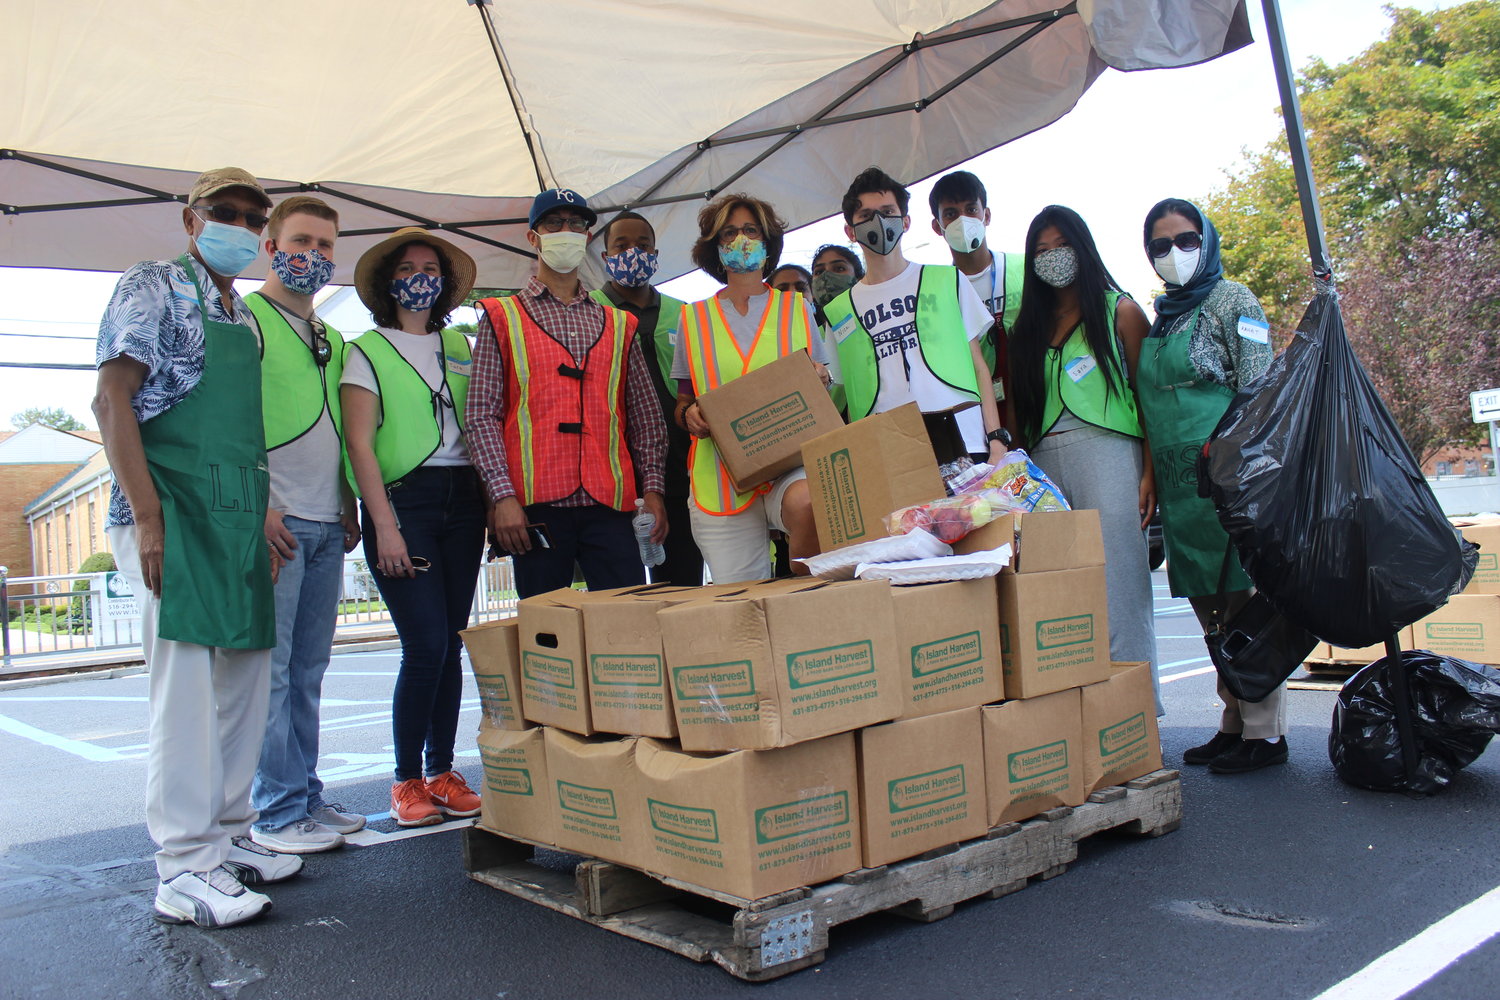 Volunteers from Island Harvest and the Long Island Muslim Society, in East Meadow, handed out boxes of food to roughly 150 local families during a joint food distribution event at the mosque last Saturday.